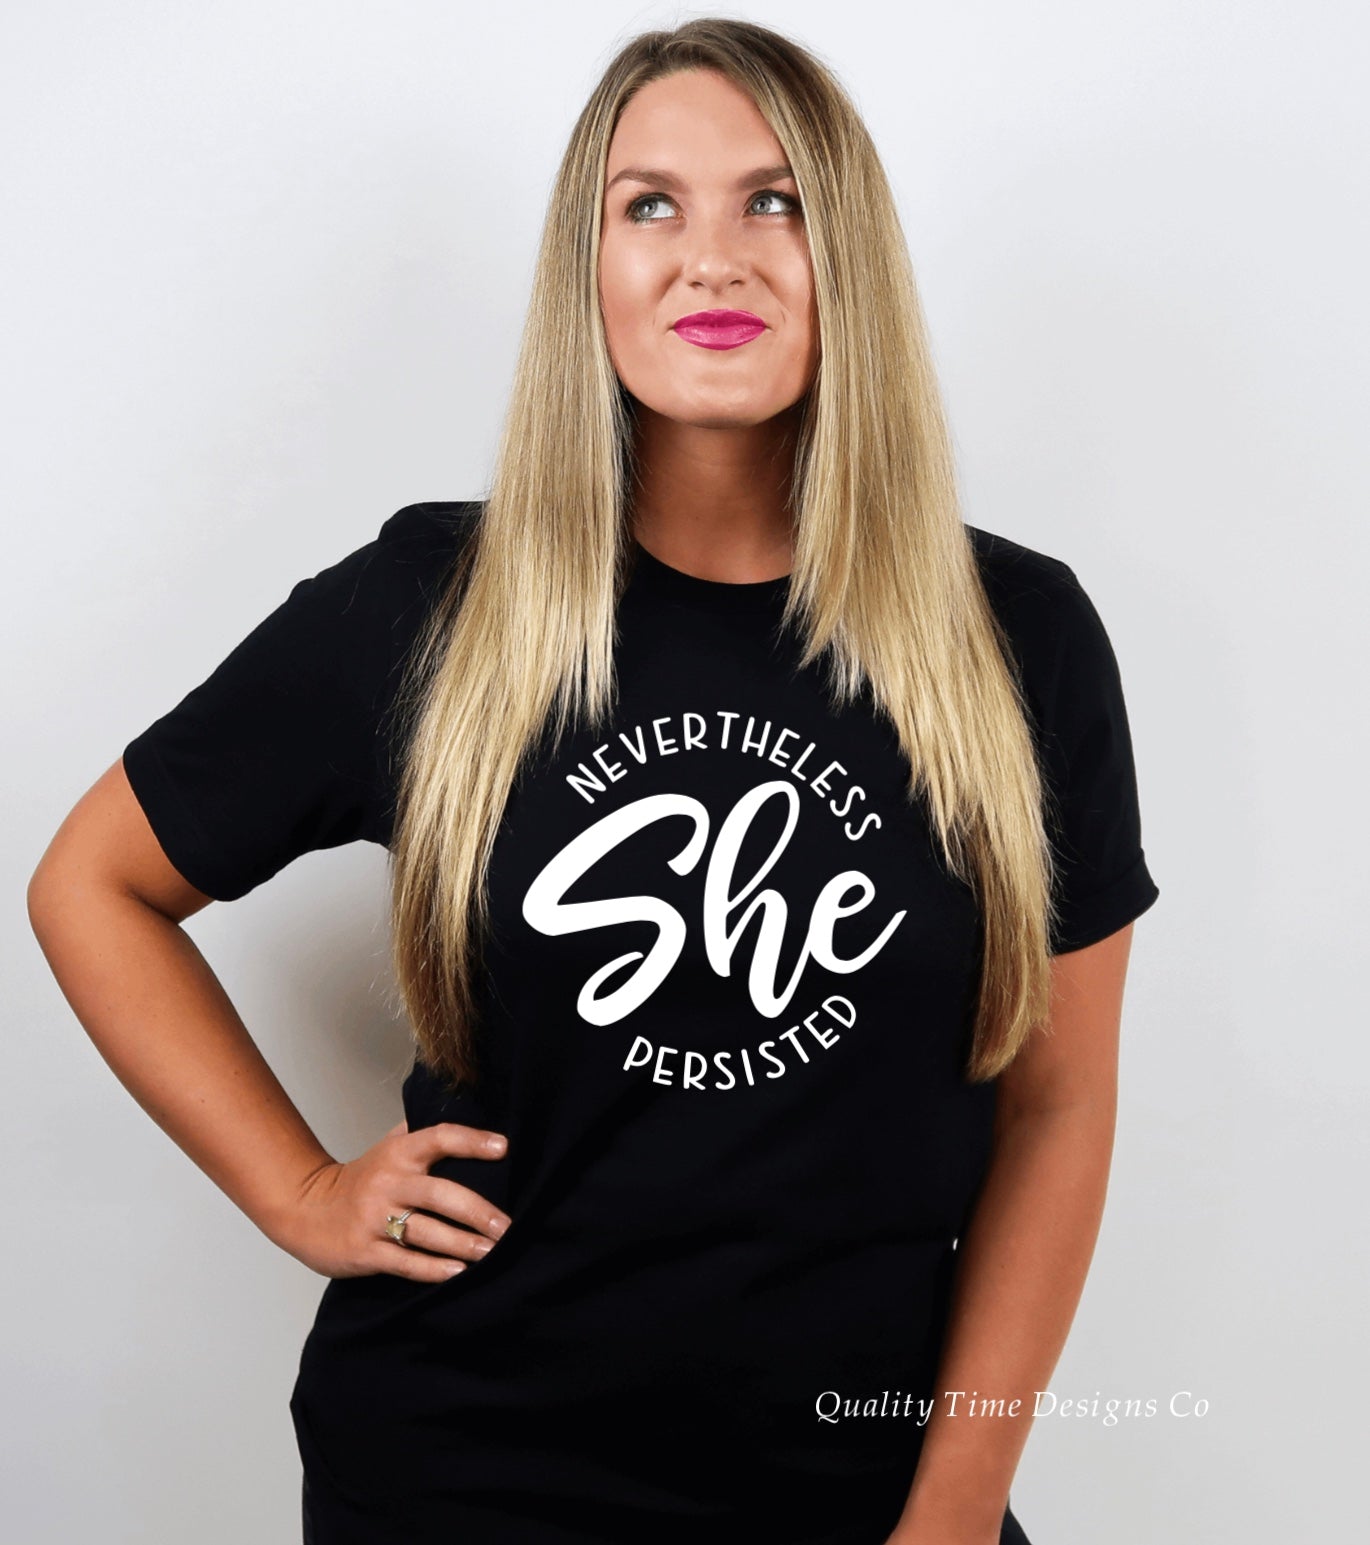 Nevertheless she persisted t-shirt 